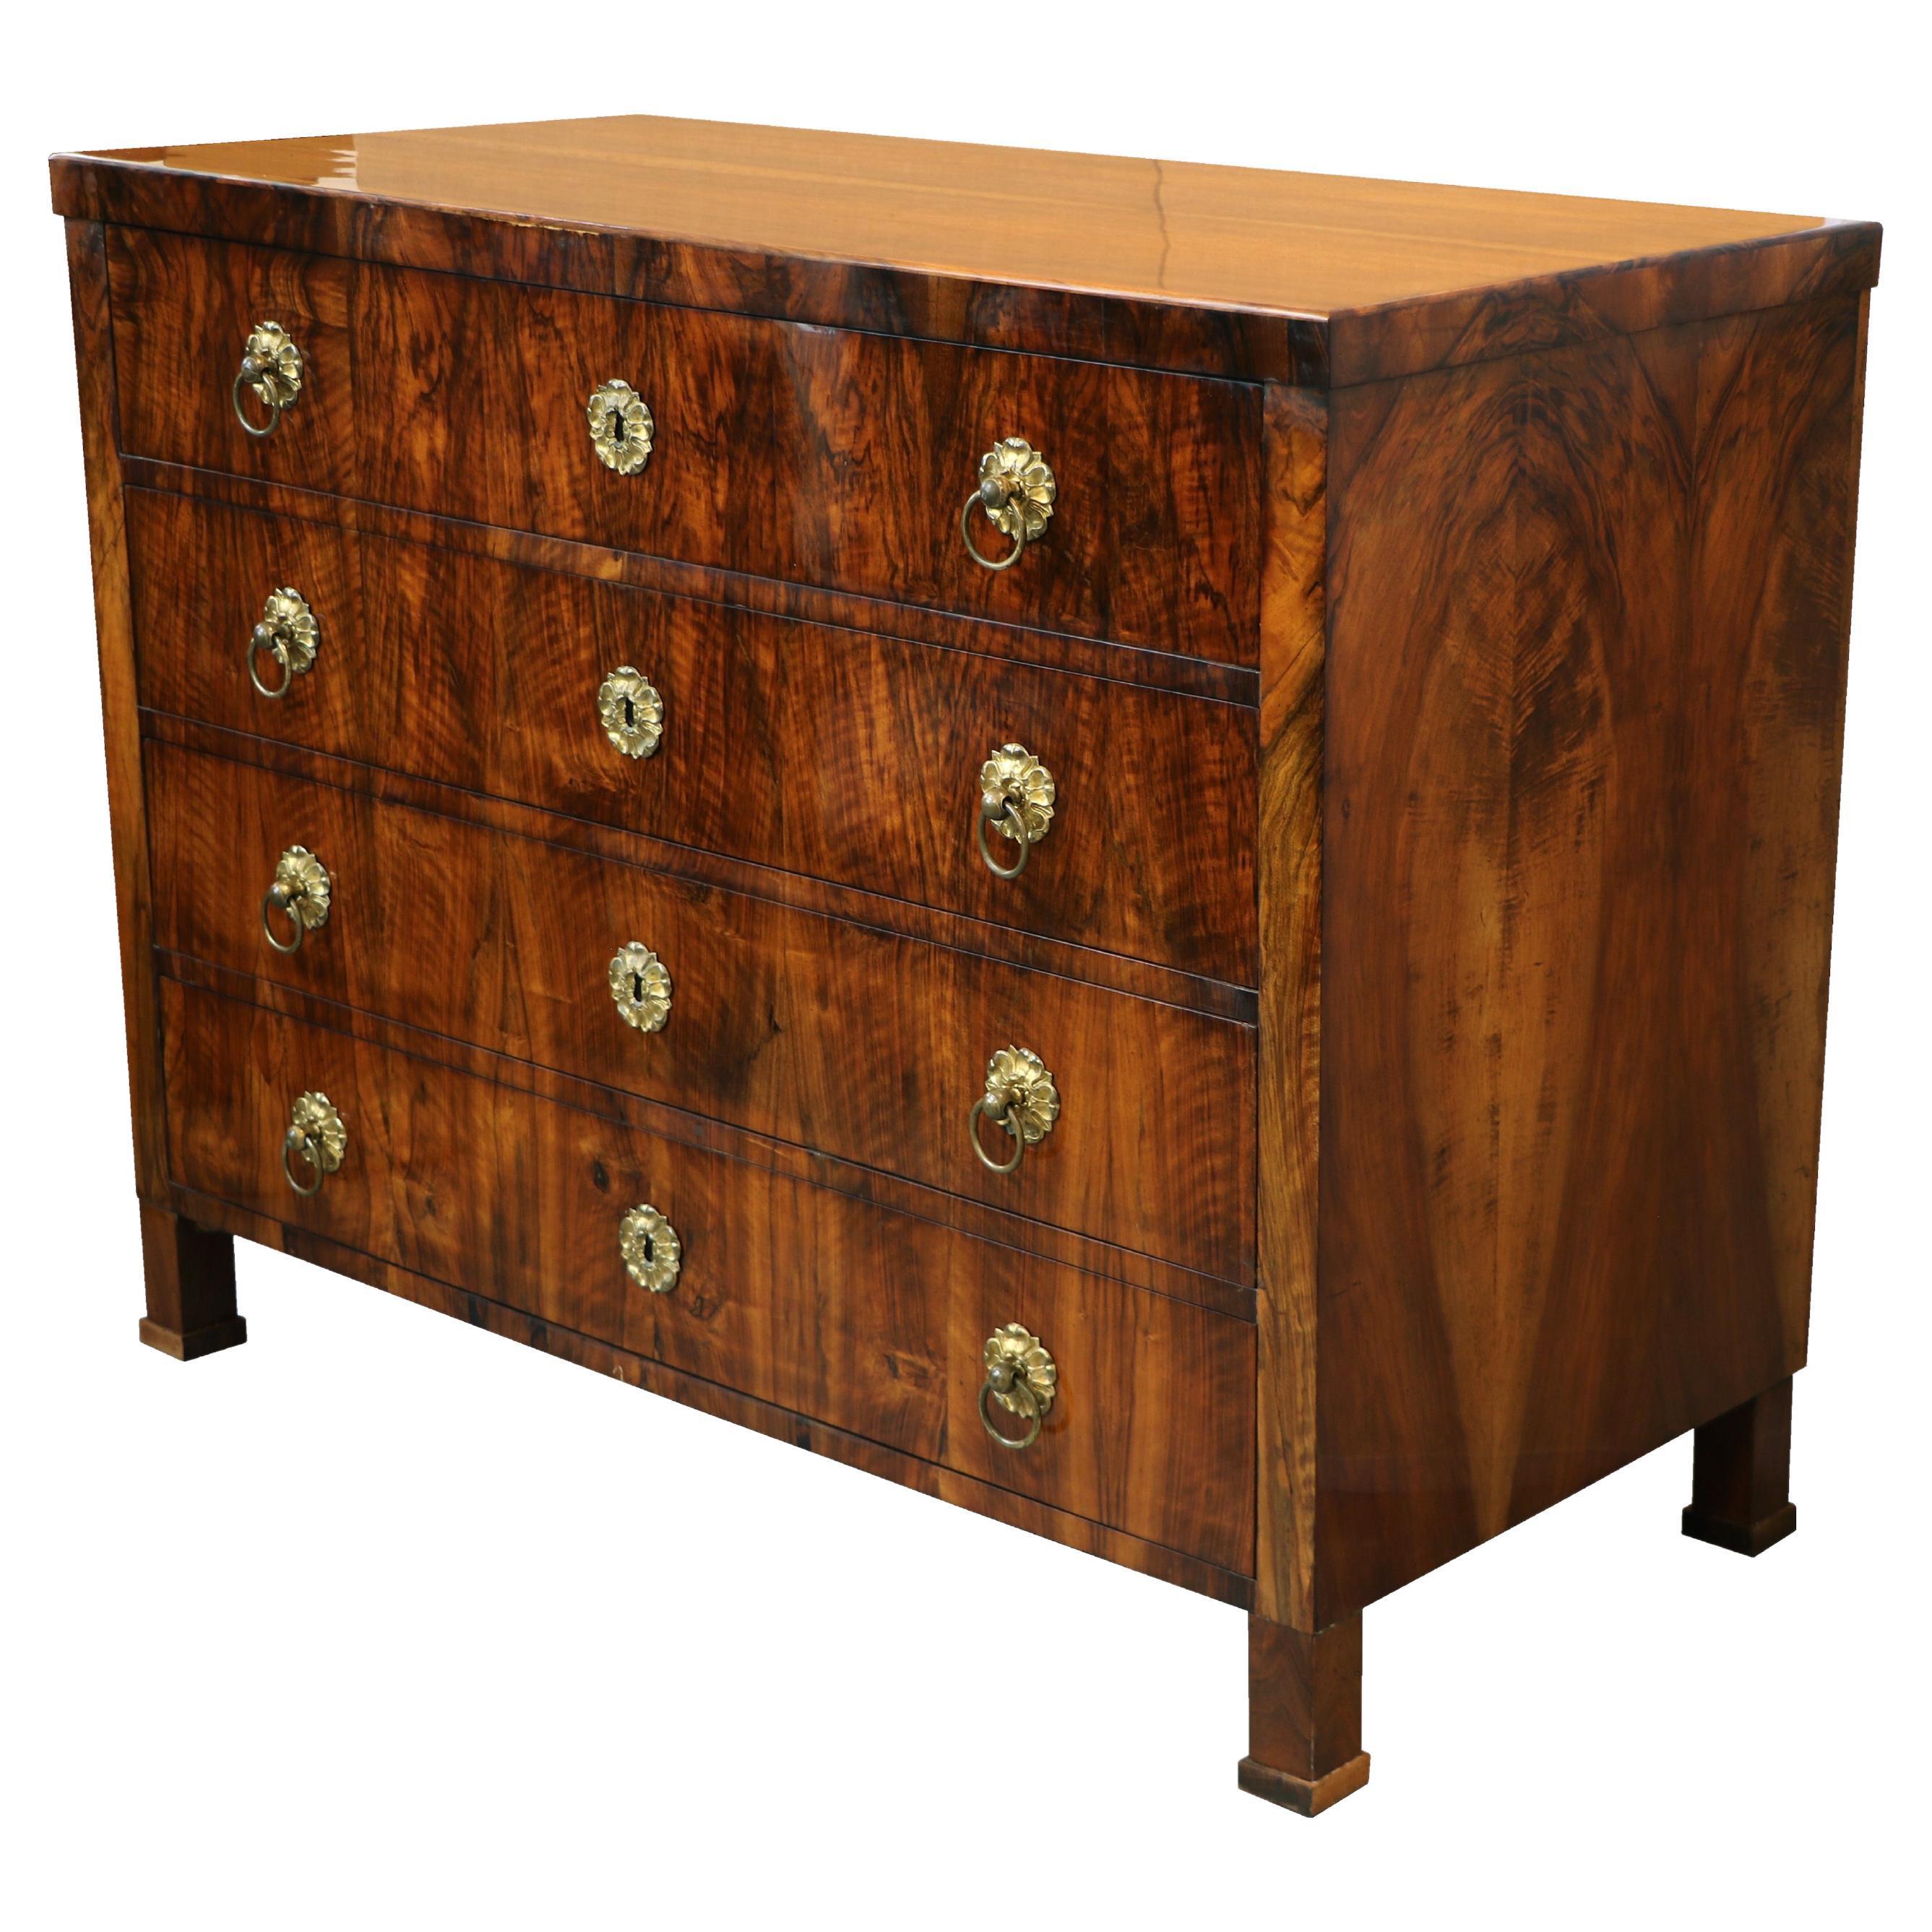 Hello,
We would like to offer you this fine, early Biedermeier walnut chest of four drawers. The piece was made in Vienna circa 1825.

Viennese Biedermeier is distinguished by their sophisticated proportions, rare and refined design and excellent